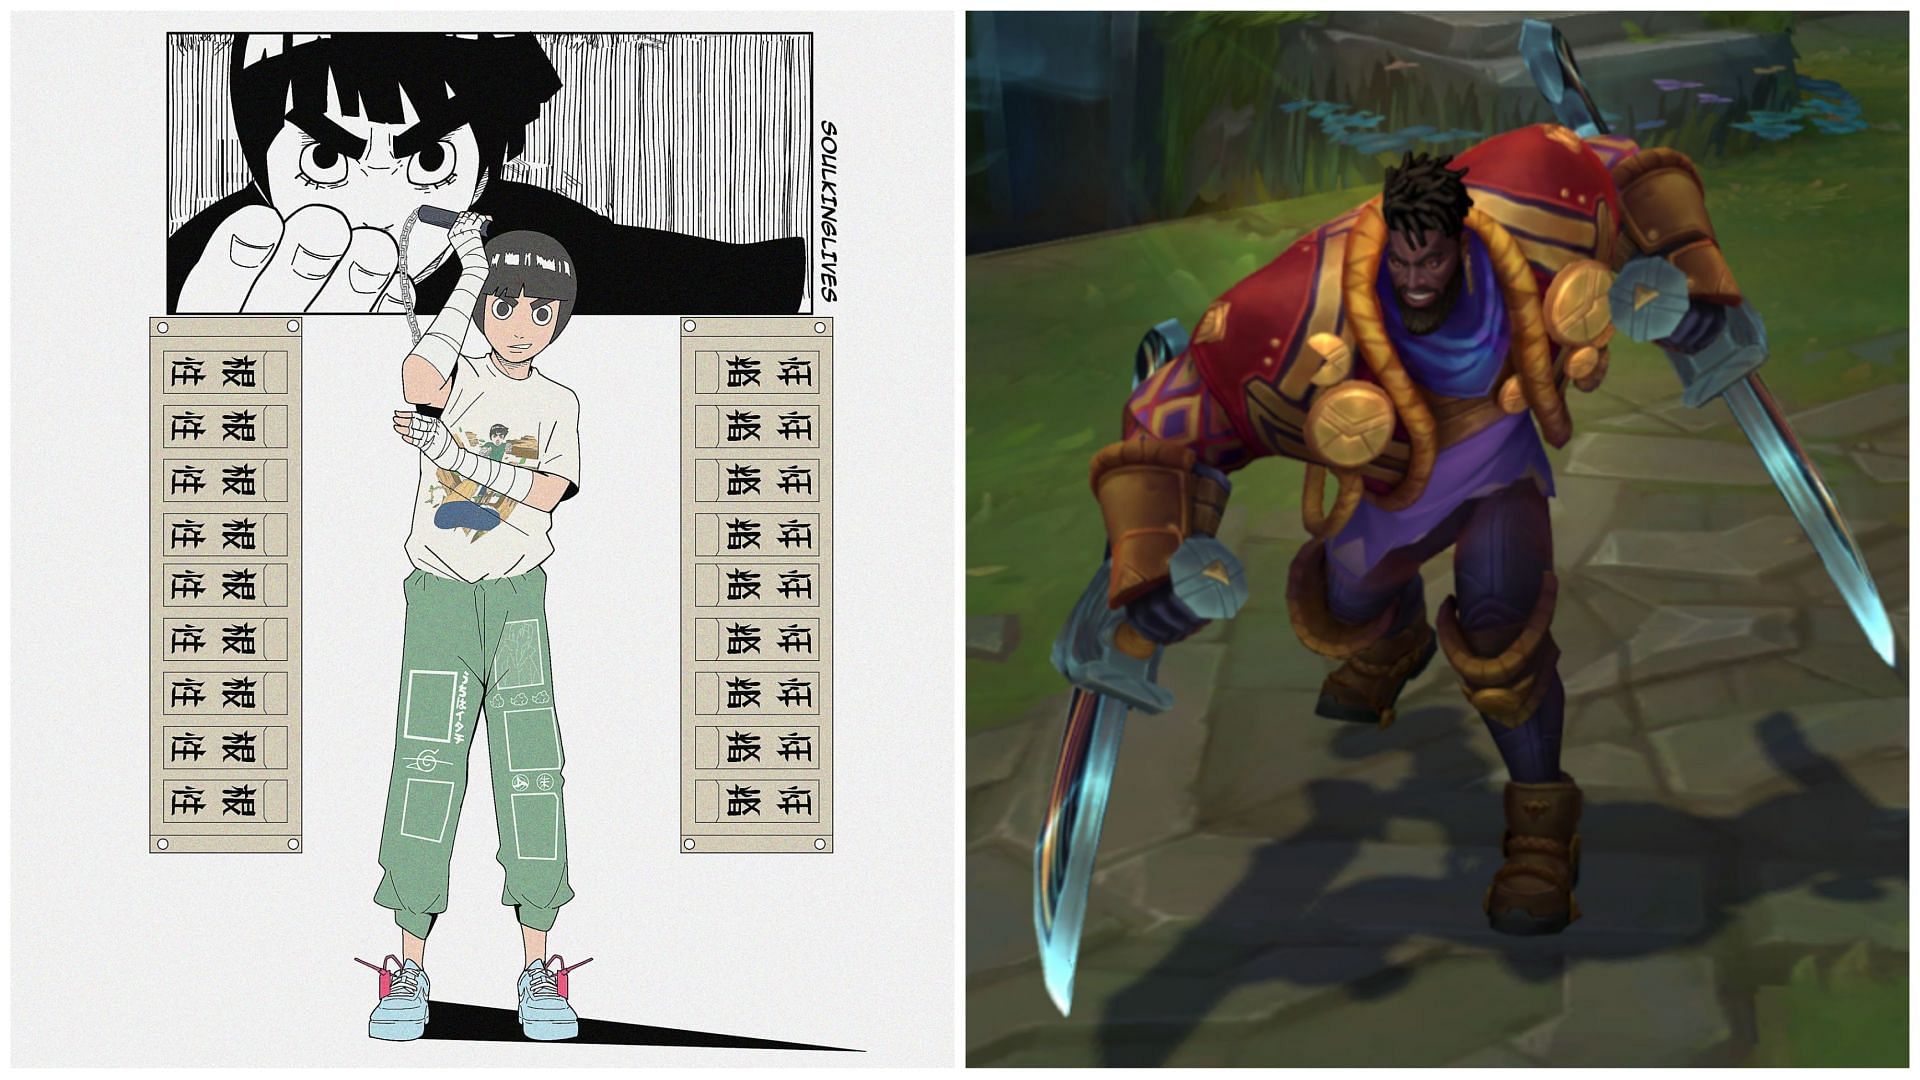 K&#039;Sante&#039;s R - All Out&#039;s concept was inspired from Rock Lee&#039;s anime story in Naruto (Images via Naruto and League of Legends)